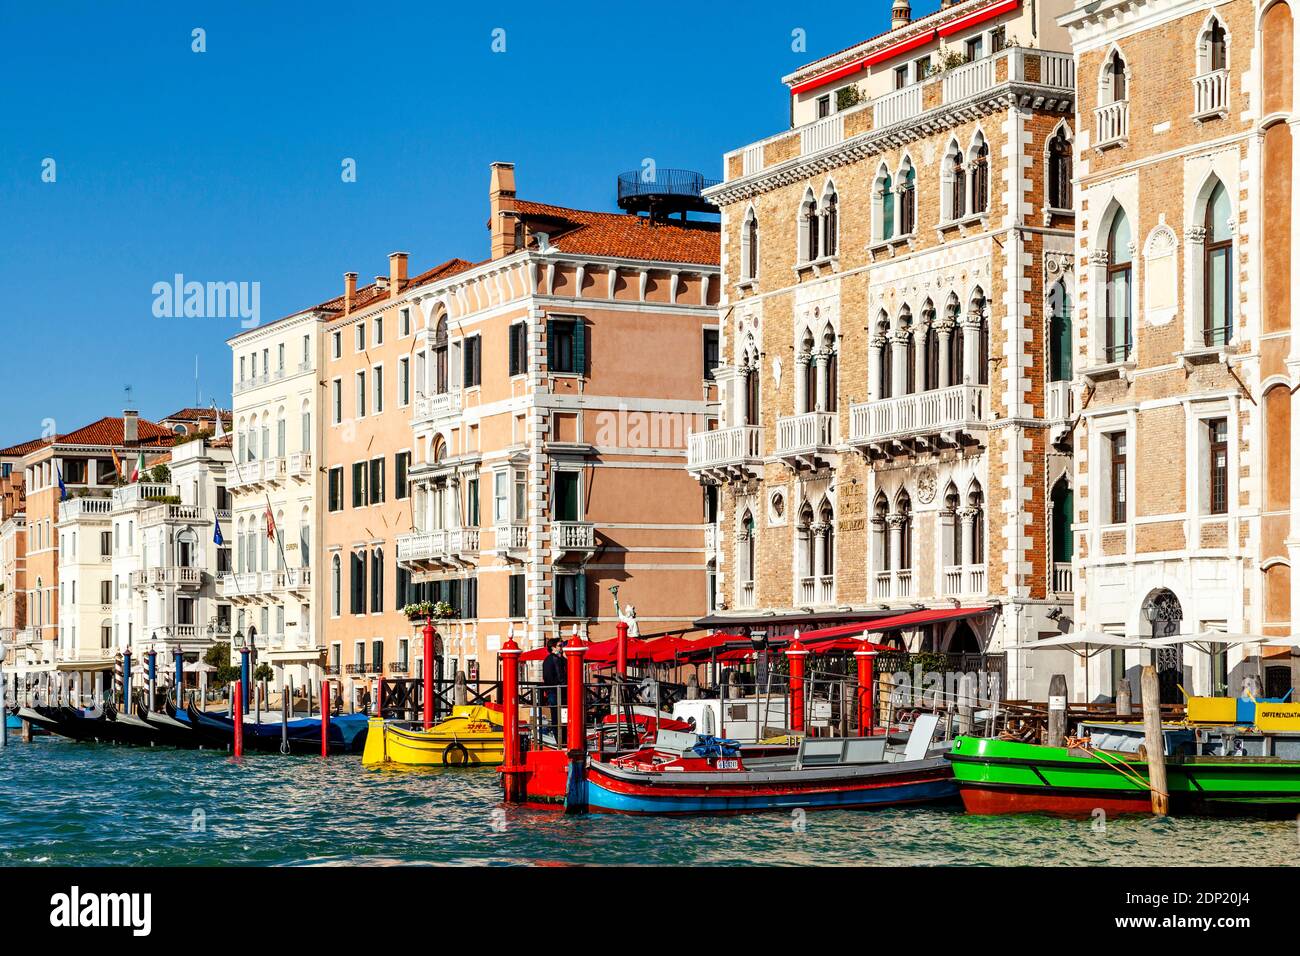 A Colourful Scene On The Grand Canal, Venice, Italy. Stock Photo